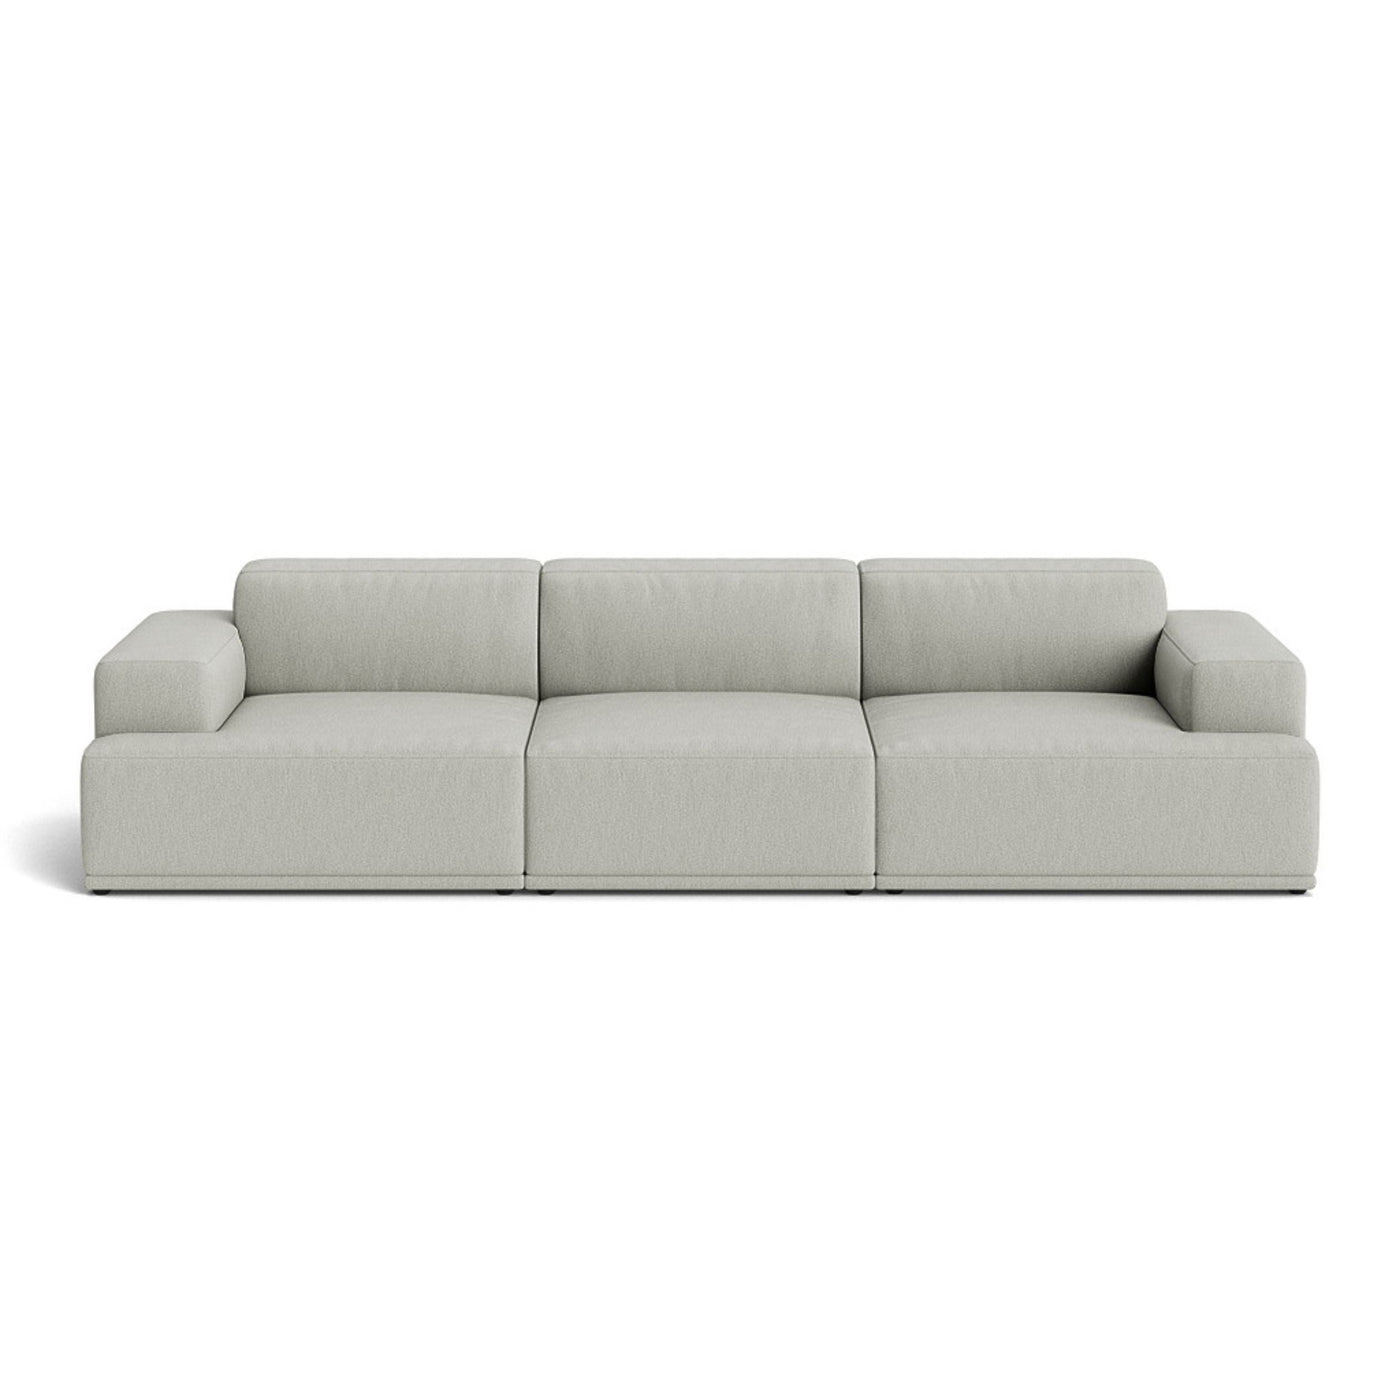 Muuto Connect Soft Modular 3 Seater Sofa, configuration 1. Made-to-order from someday designs. #colour_clay-12